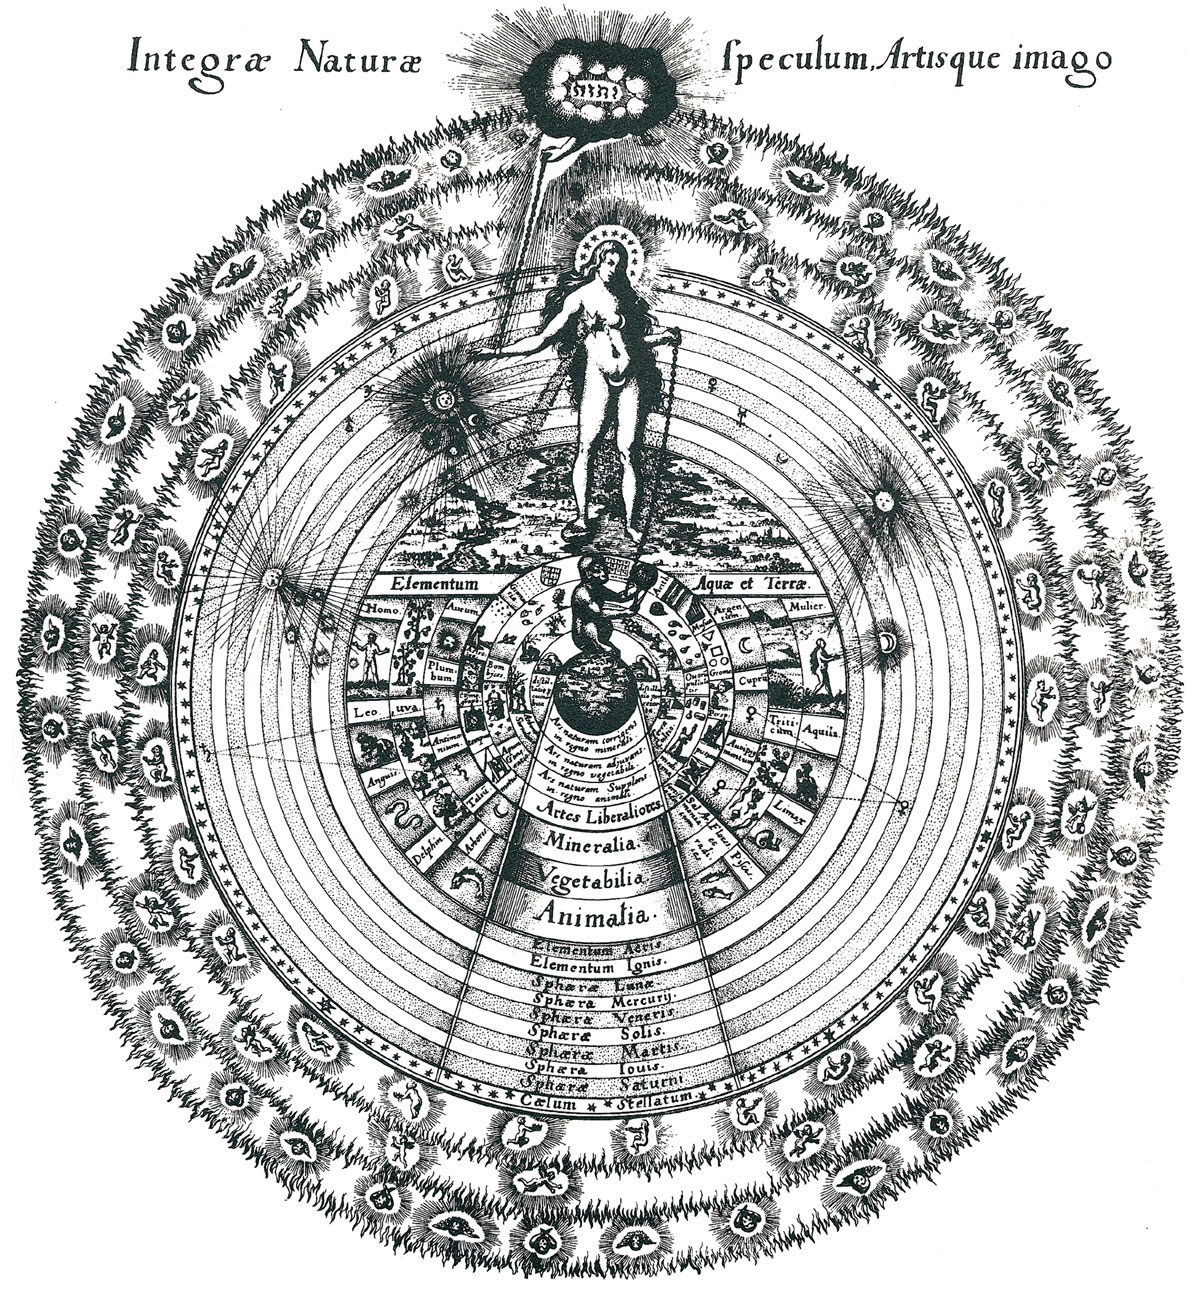 A 1617 illustration of nature and art's place in the universe by Robert Fludd, entitled “Integrae Naturae Speculum Artisque Imago.”